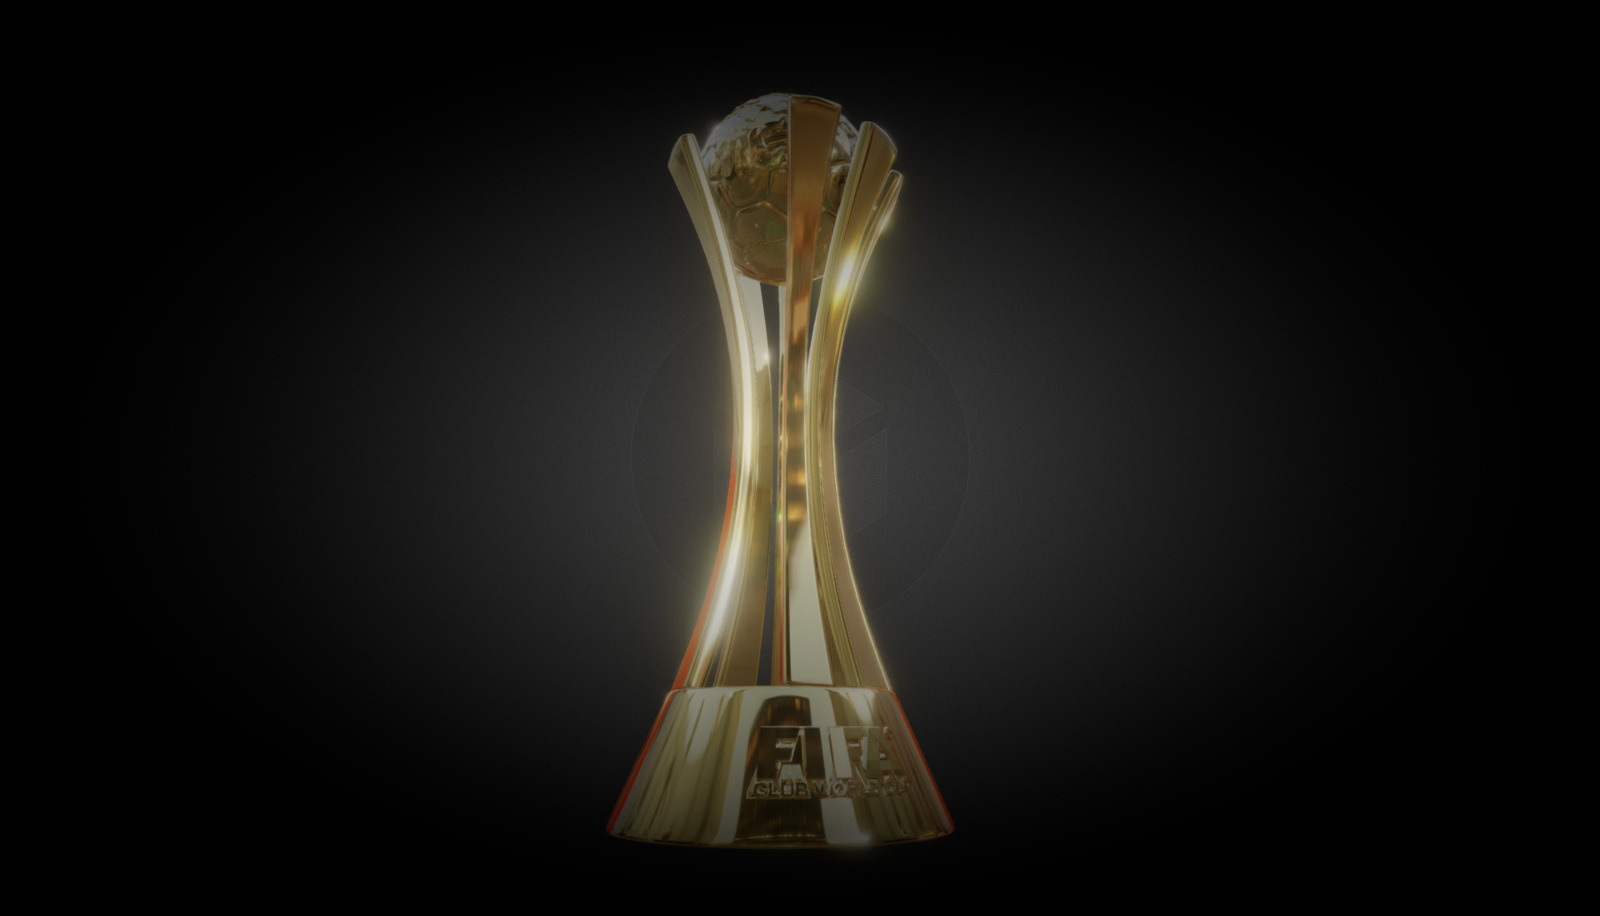 FIFA Club World Cup, first released in 2000, awarding the winner football team of the FIFA Club World championship.
Click to print at 3DHubs: http://3dhubs.com/3dprint/add/product/fifa_world_cup - FIFA Club World Cup Award - Download Free 3D model by JuanG3D 3d model